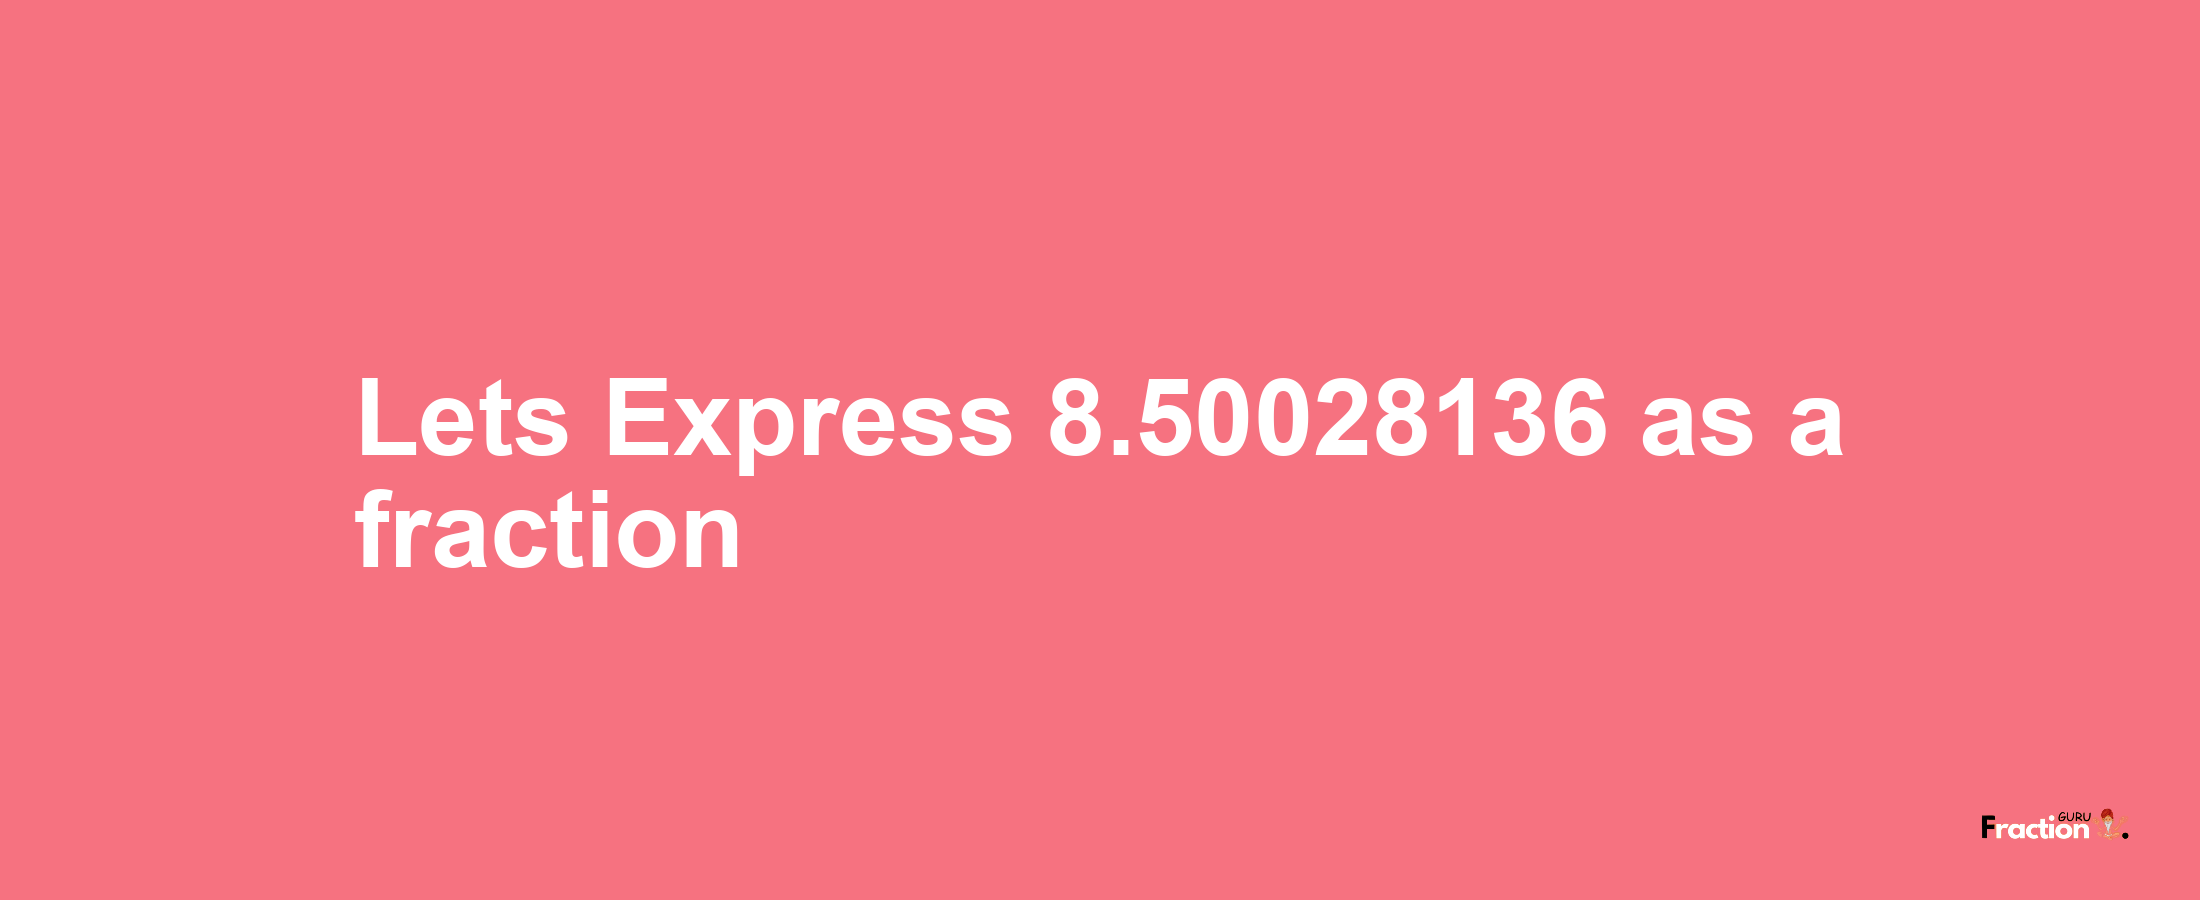 Lets Express 8.50028136 as afraction